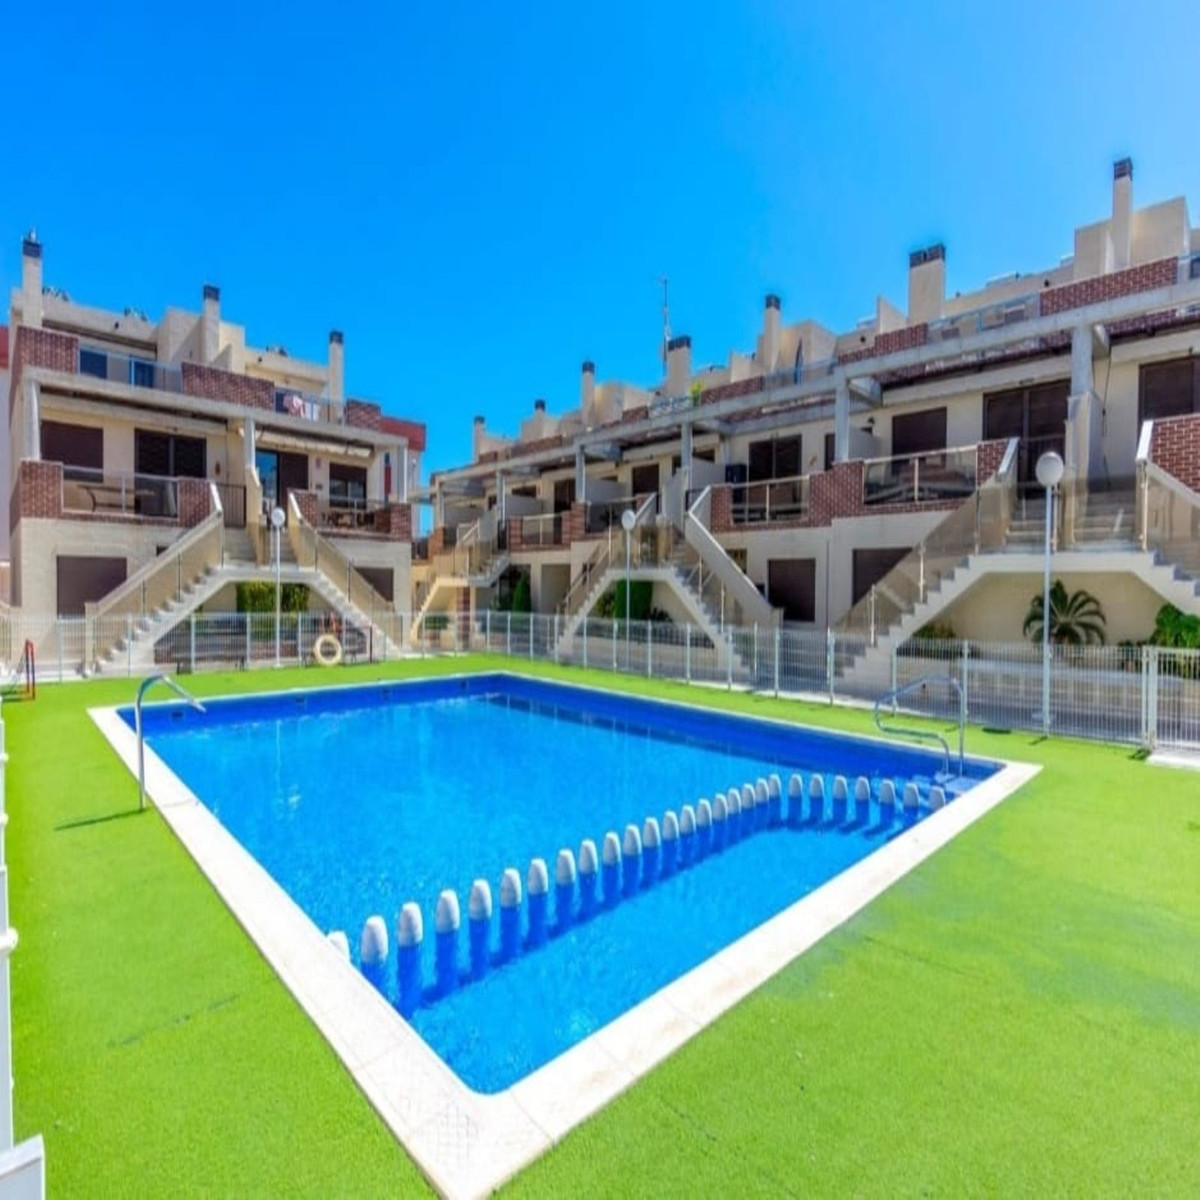 Welcome to a stunning modern duplex located in the luxurious Sinergia World II Spa and Fitness resor, Spain